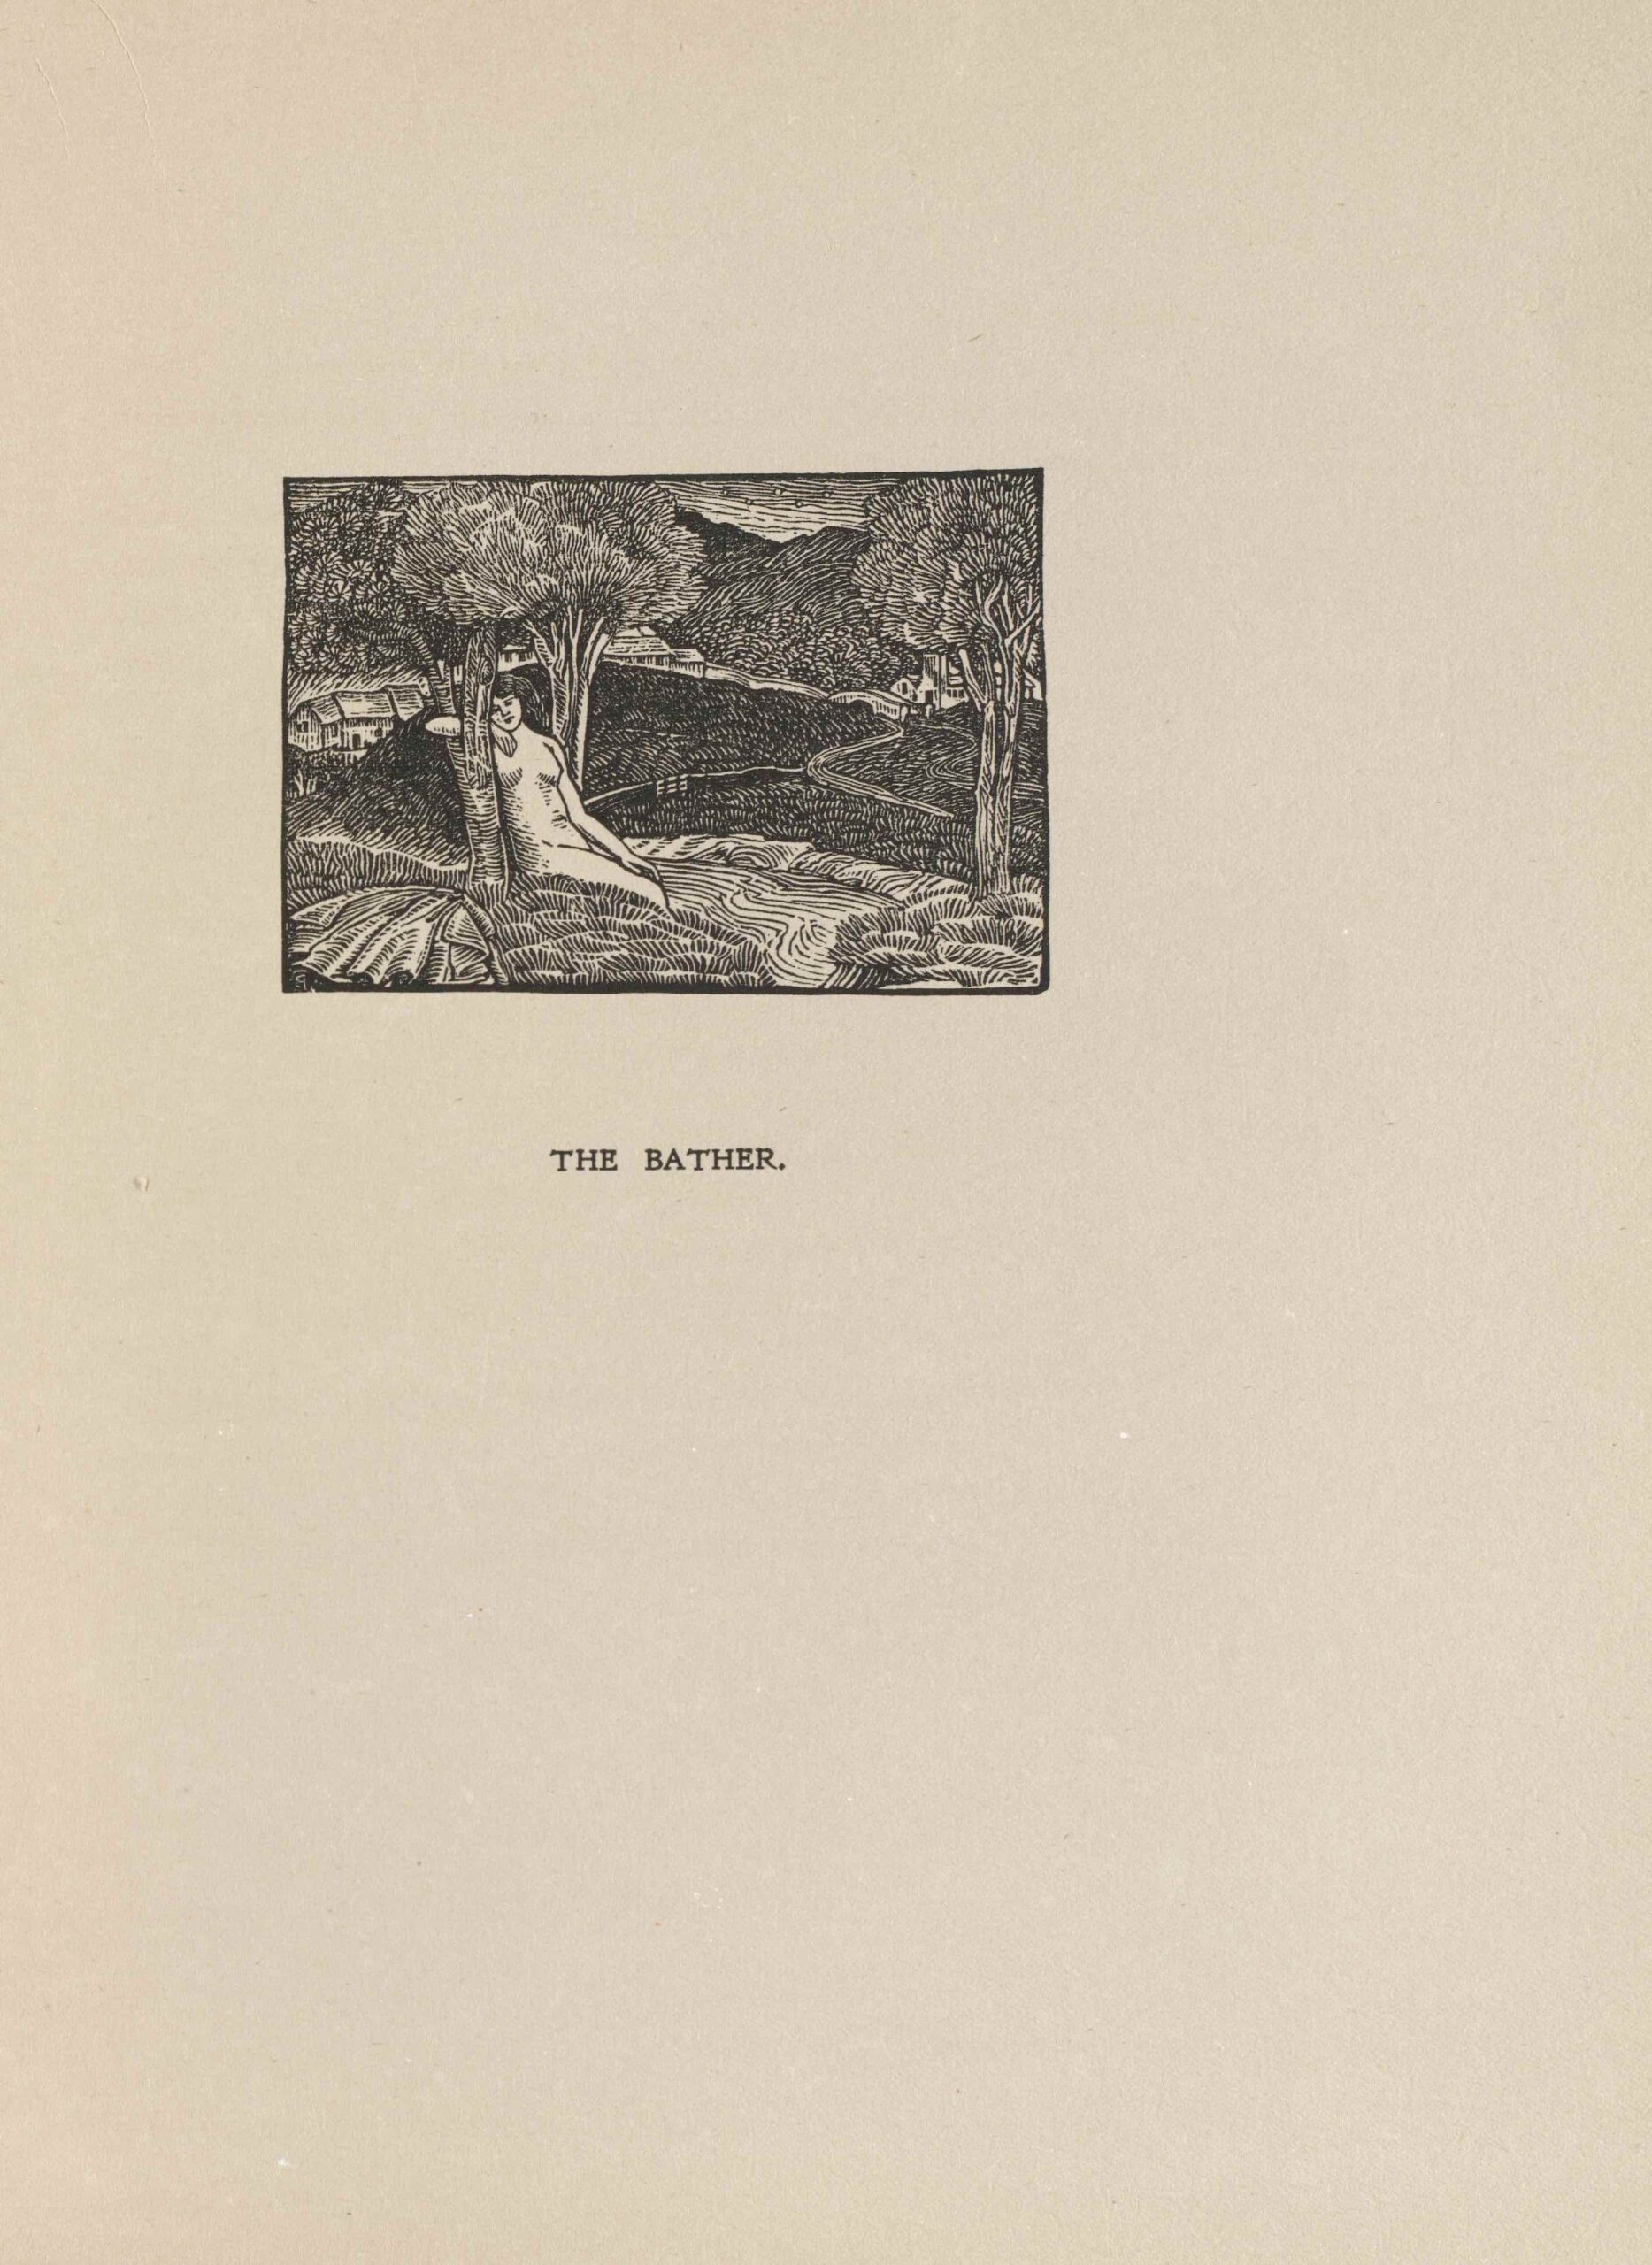 The image is in landscape orientation and is centered in the upper third of the page. The image is printed in black ink. In the left foreground, a naked woman is seated on a hill with crossed legs. She is leaning on a tree and is resting her head on her arm which is propped up against a branch. The area around her is a hilly landscape with a small stream of water running from the center foreground to the left background. Two large trees stand on each side of the running water. One slightly smaller tree is depicted behind the woman. There are two roads entering the image on the right which lead to the bridges and row of houses in the background. In the far background distance are high hills of grass and plant life, and clouded skies.